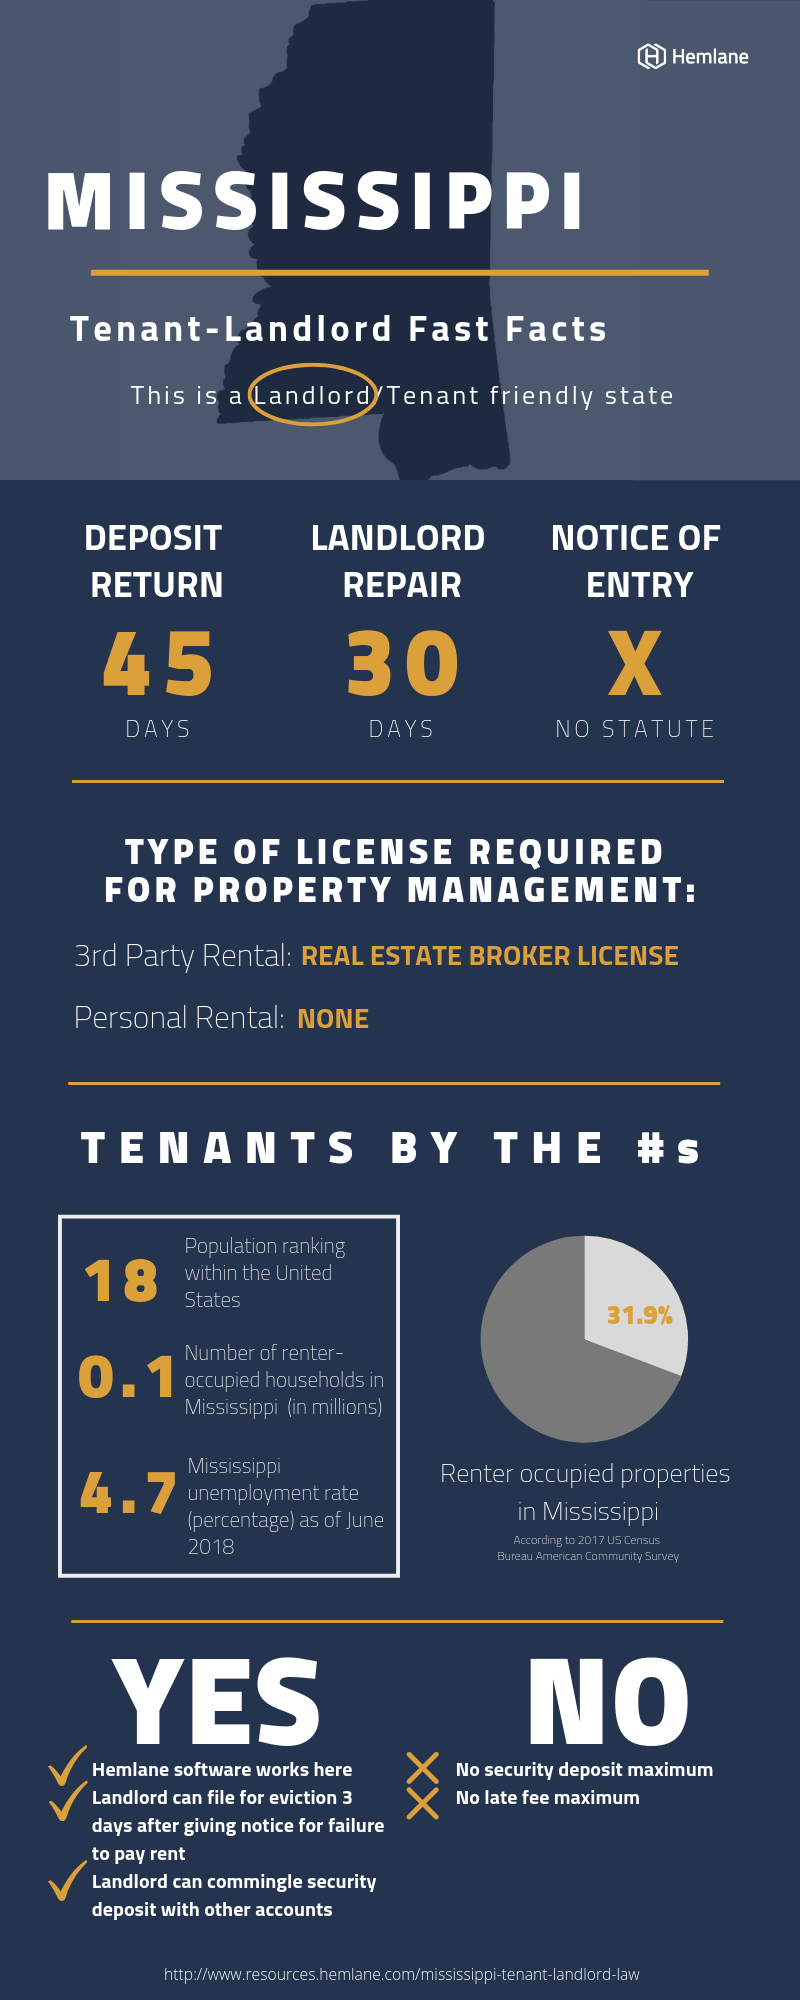 Mississippi-Tenant-Landlord-Law-Fast-Facts